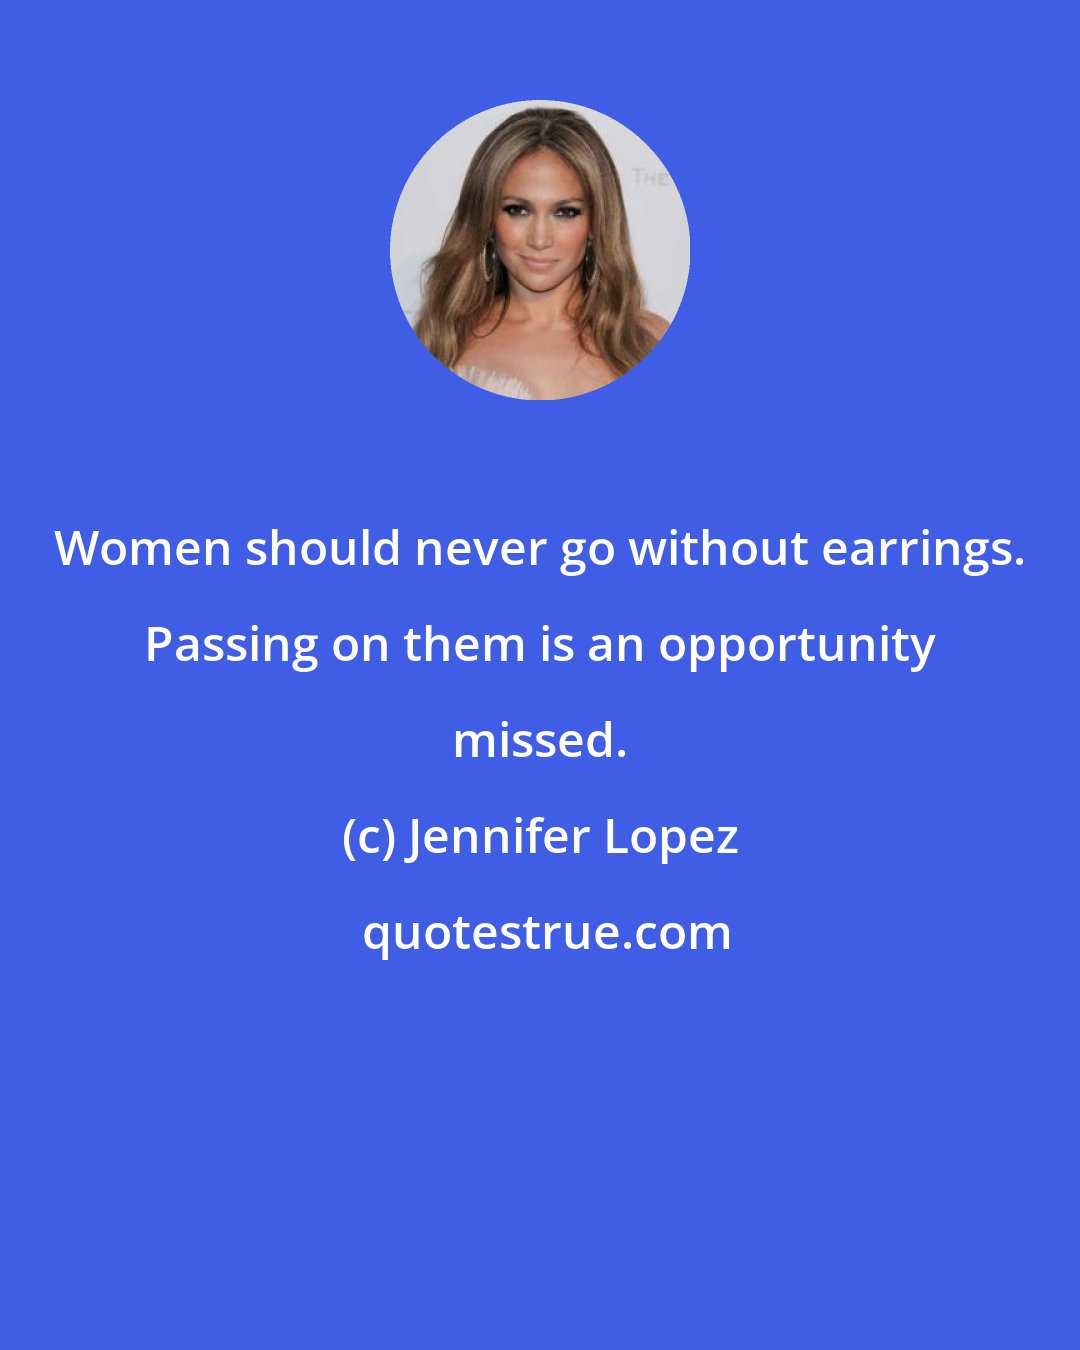 Jennifer Lopez: Women should never go without earrings. Passing on them is an opportunity missed.